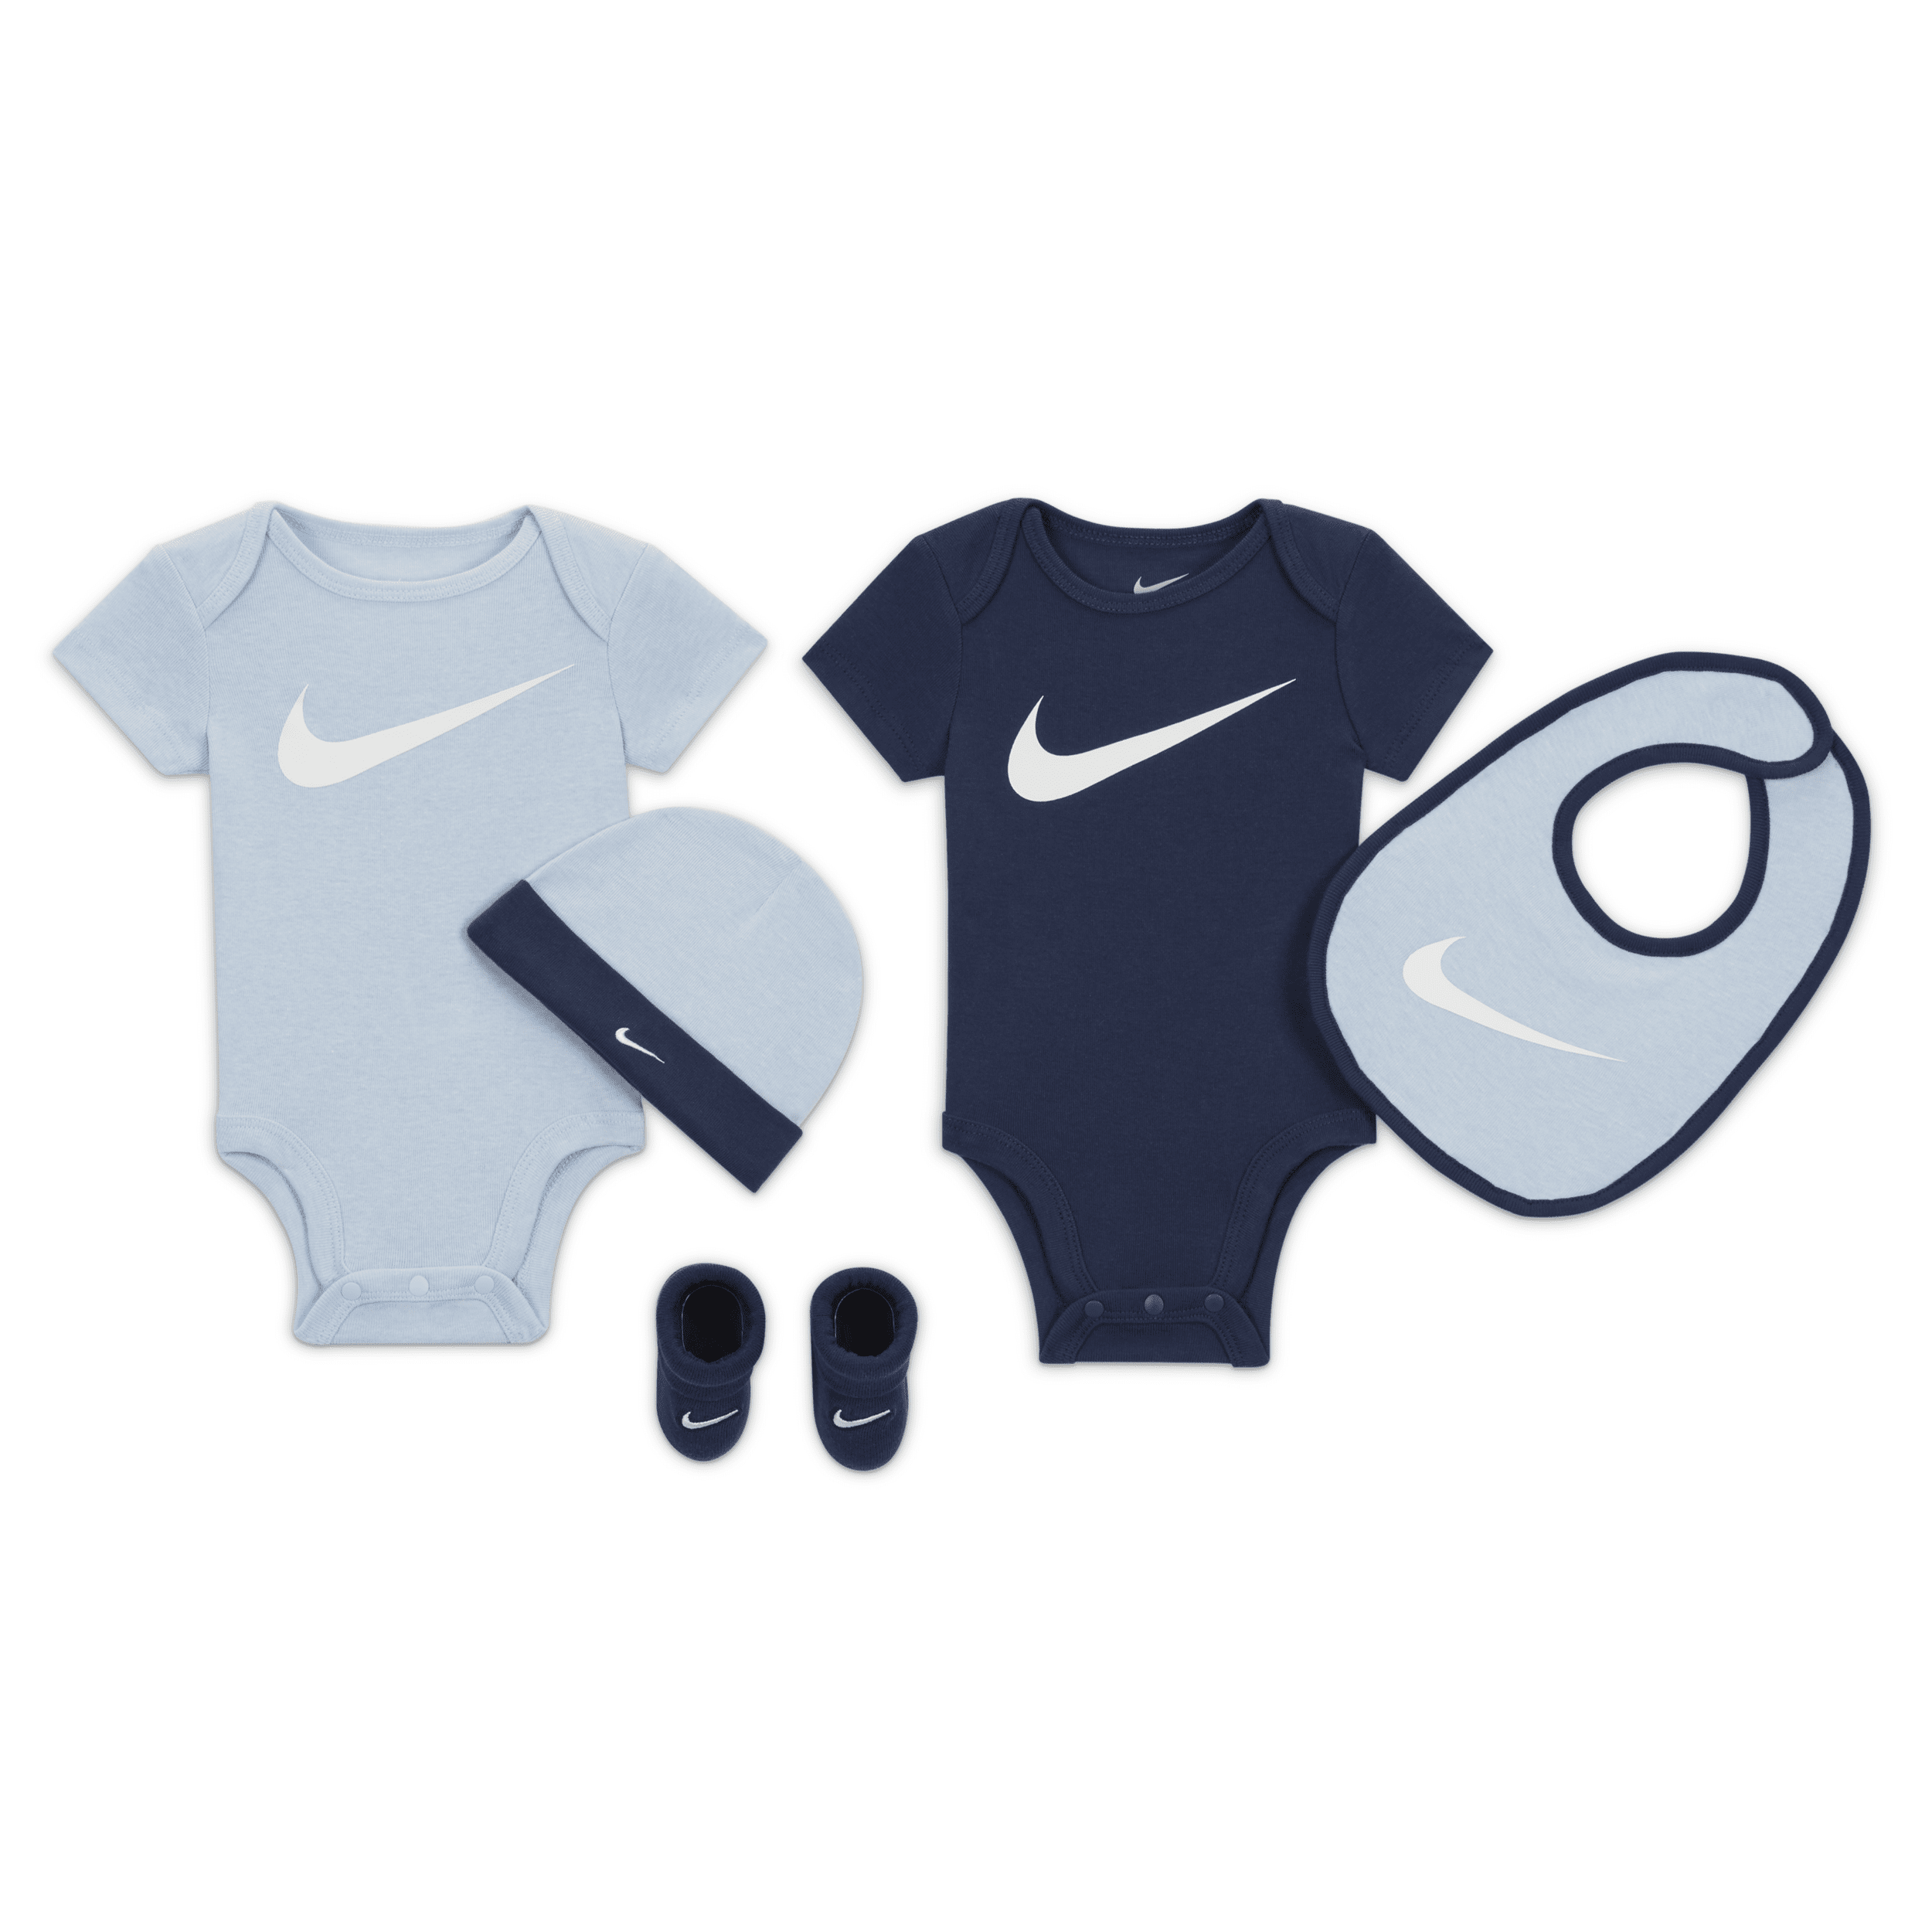 Nike 5-piece Gift Set Baby 5-piece Boxed Gift Set In Blue